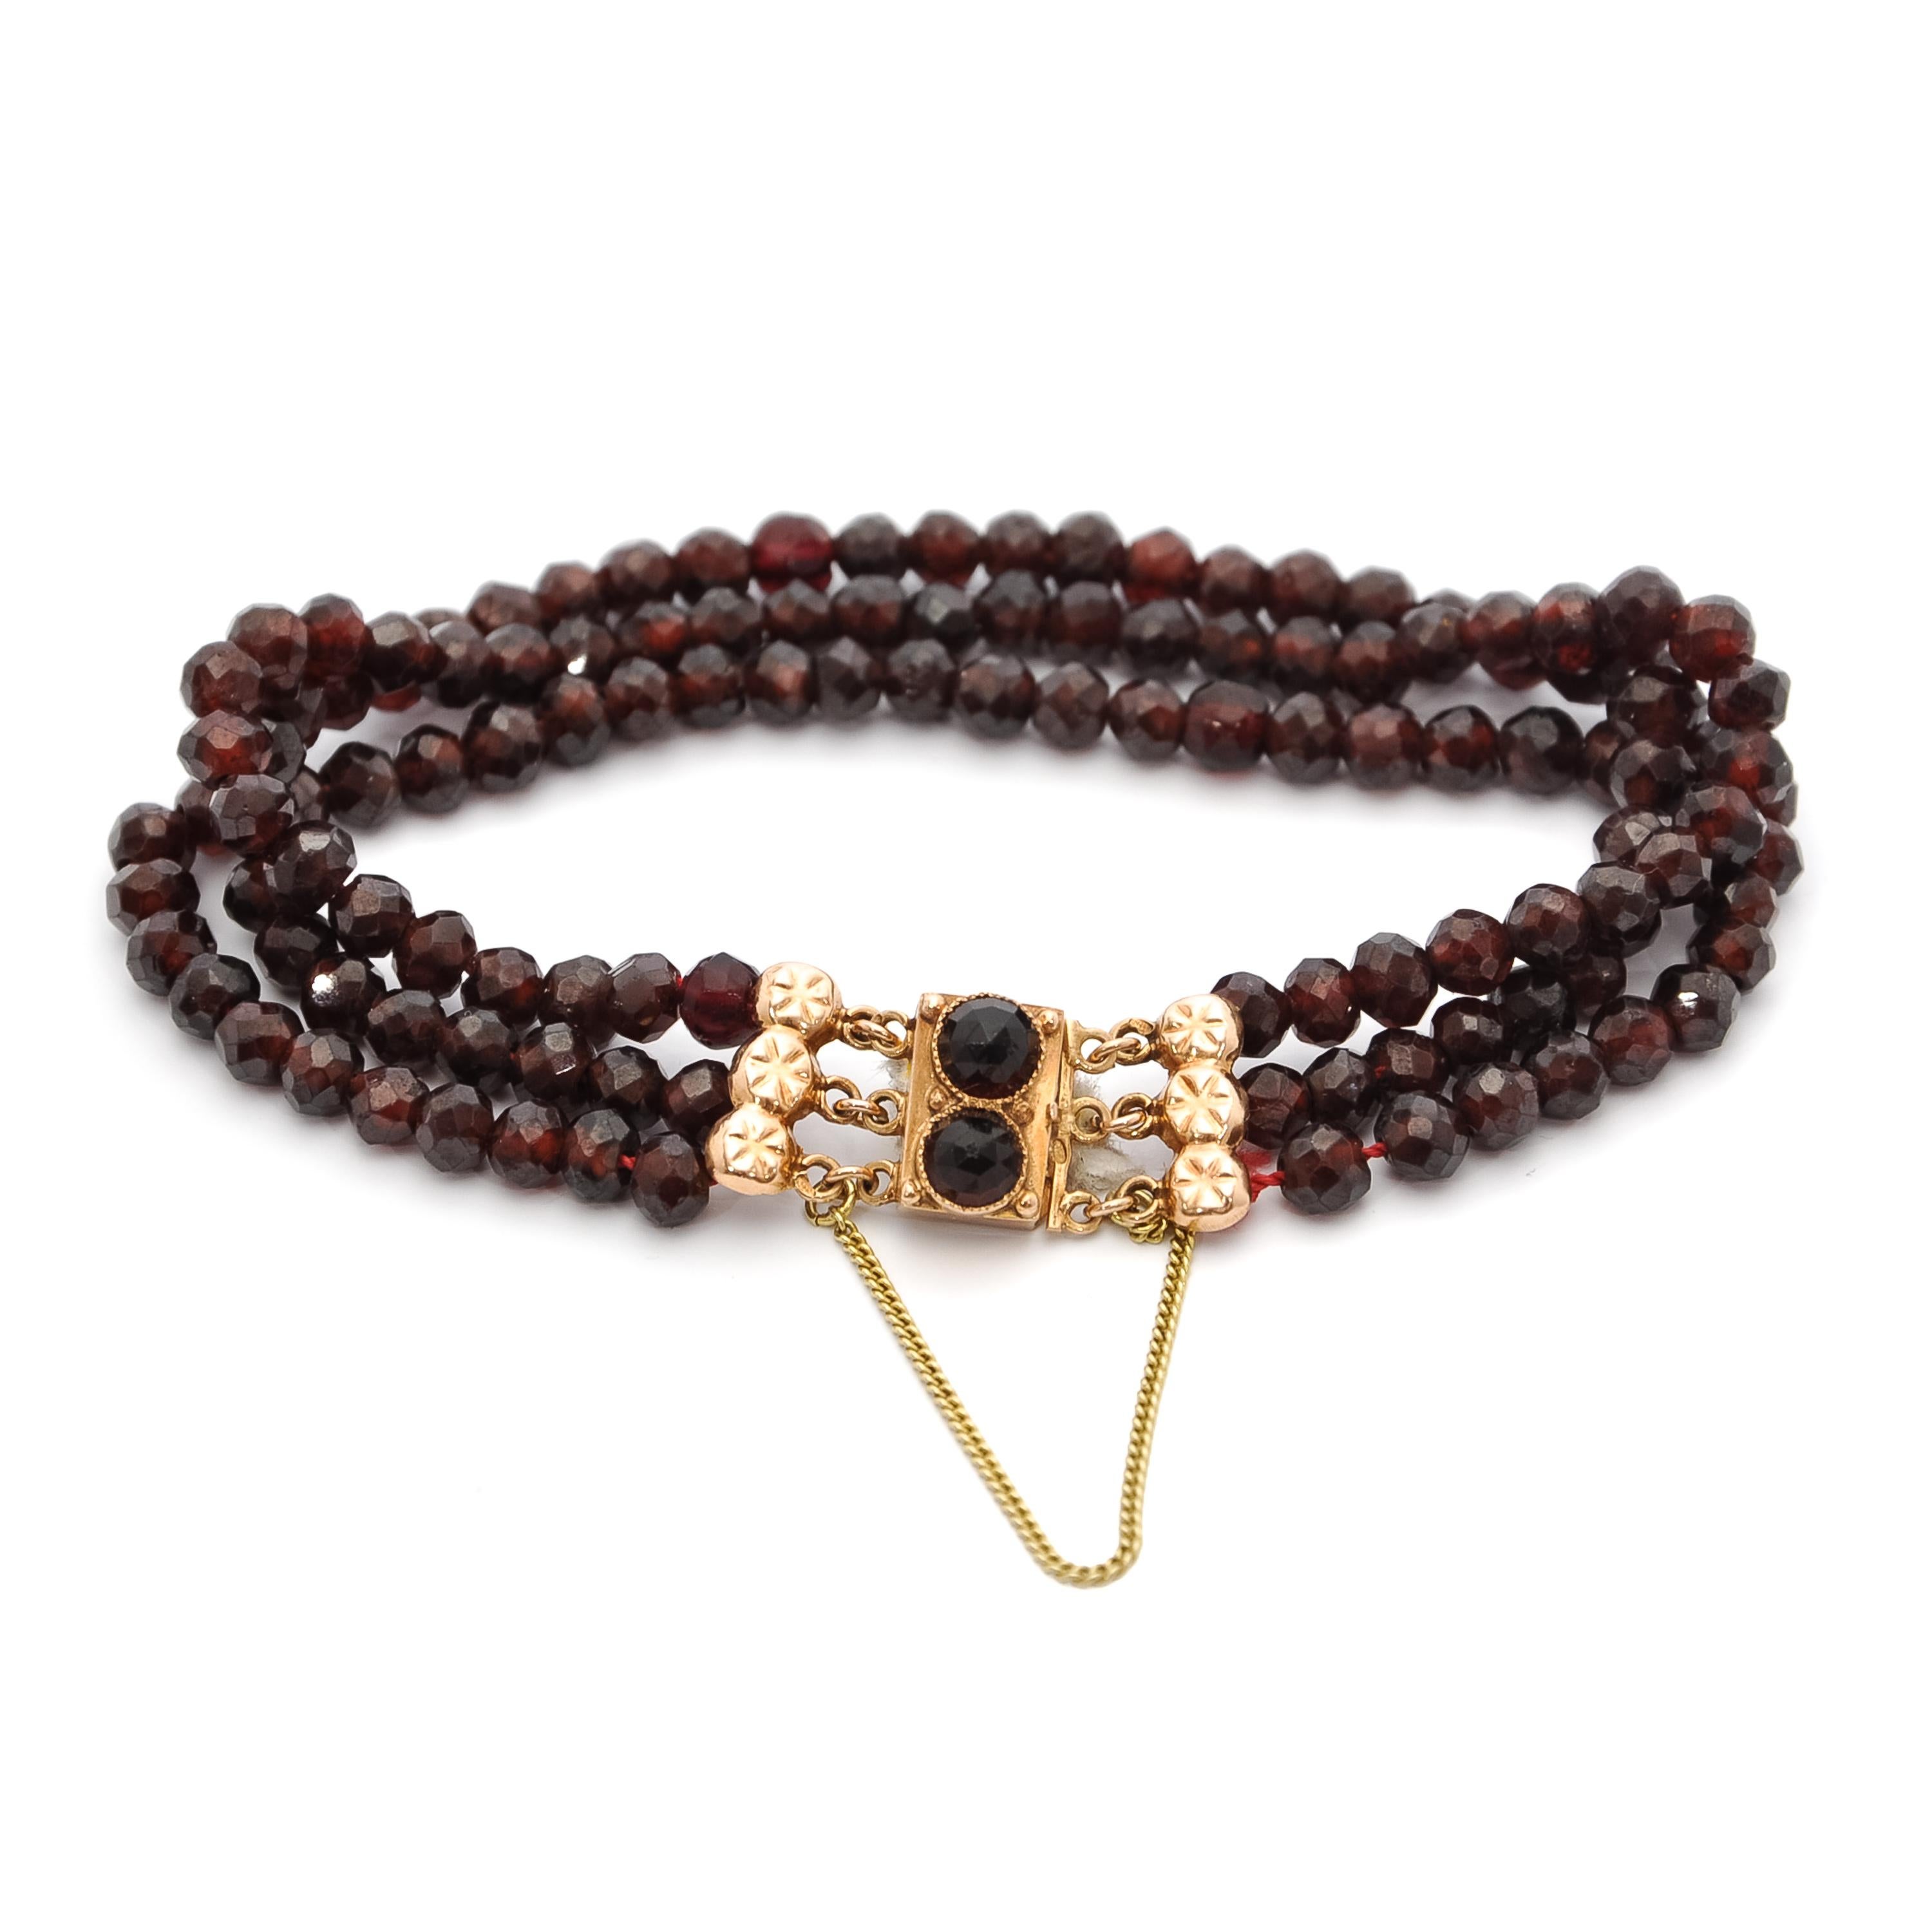 A three-strand 14 karat yellow gold garnet bracelet. The clasp of this bracelet is beautifully detailed. The raised center of the clasp is surrounded with a twisted gold ribbon. At the end of each string a small gold detail is attached between the